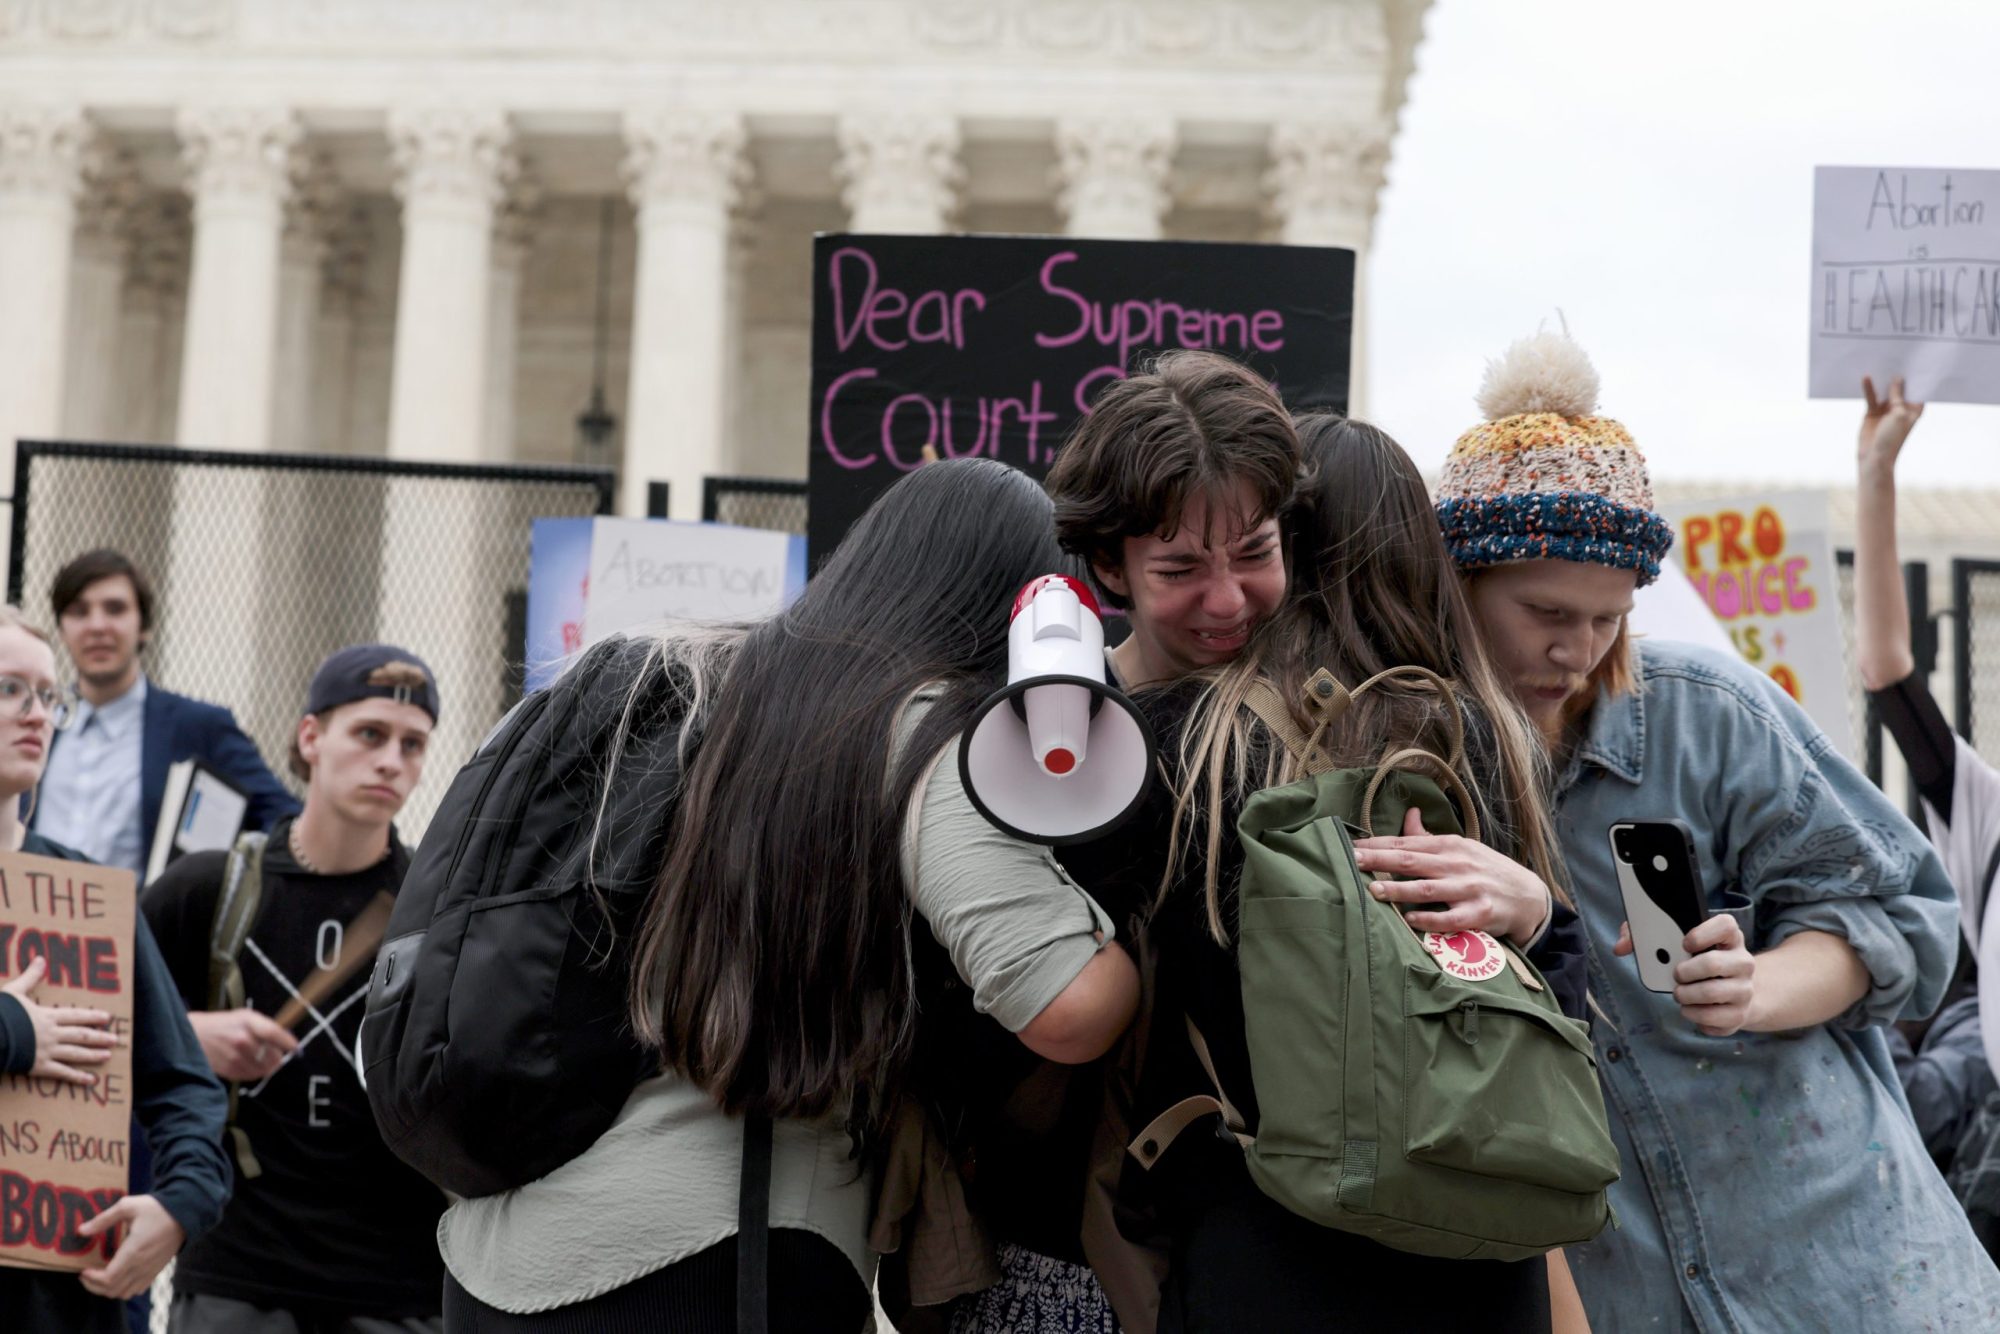 Hannah Yost is embraced by her husband and fellow protesters as she speaks about her experience with sexual assault during an abortion-rights rally in front of the U.S. Supreme Court building on May 05, 2022 in Washington, DC. Photo by Anna Moneymaker/Getty Images